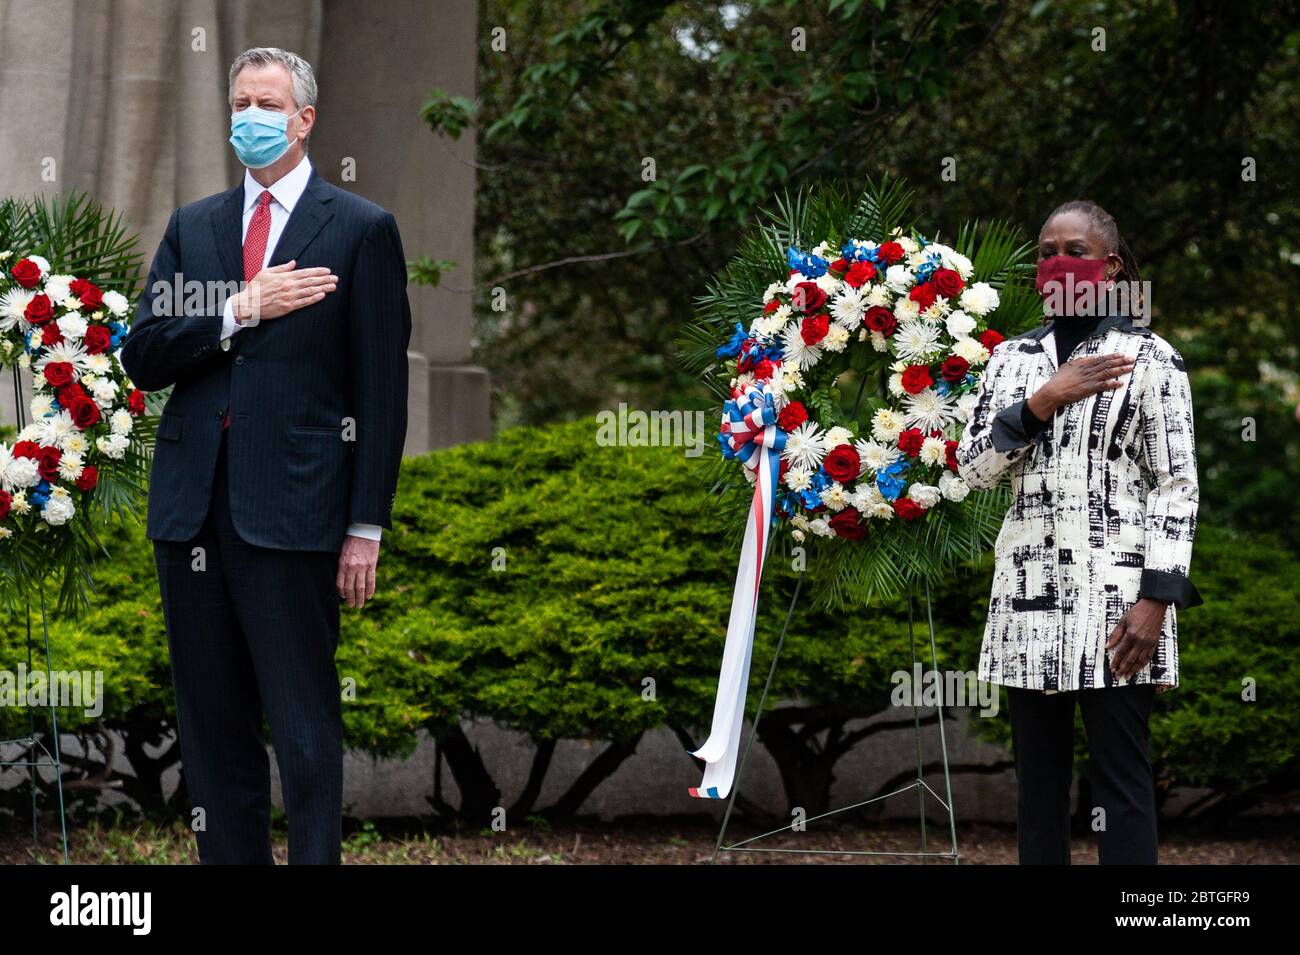 Brooklyn, United States. 25th May, 2020. New York City Mayor Bill de Blasio and First Lady McCray attend the Memorial Day Wreath Laying Ceremony at the Brooklyn War Memorial in Brooklyn, New York, on May 25, 2020. (Photo by Gabriele Holtermann/Pacific Press) Credit: Pacific Press Agency/Alamy Live News Stock Photo